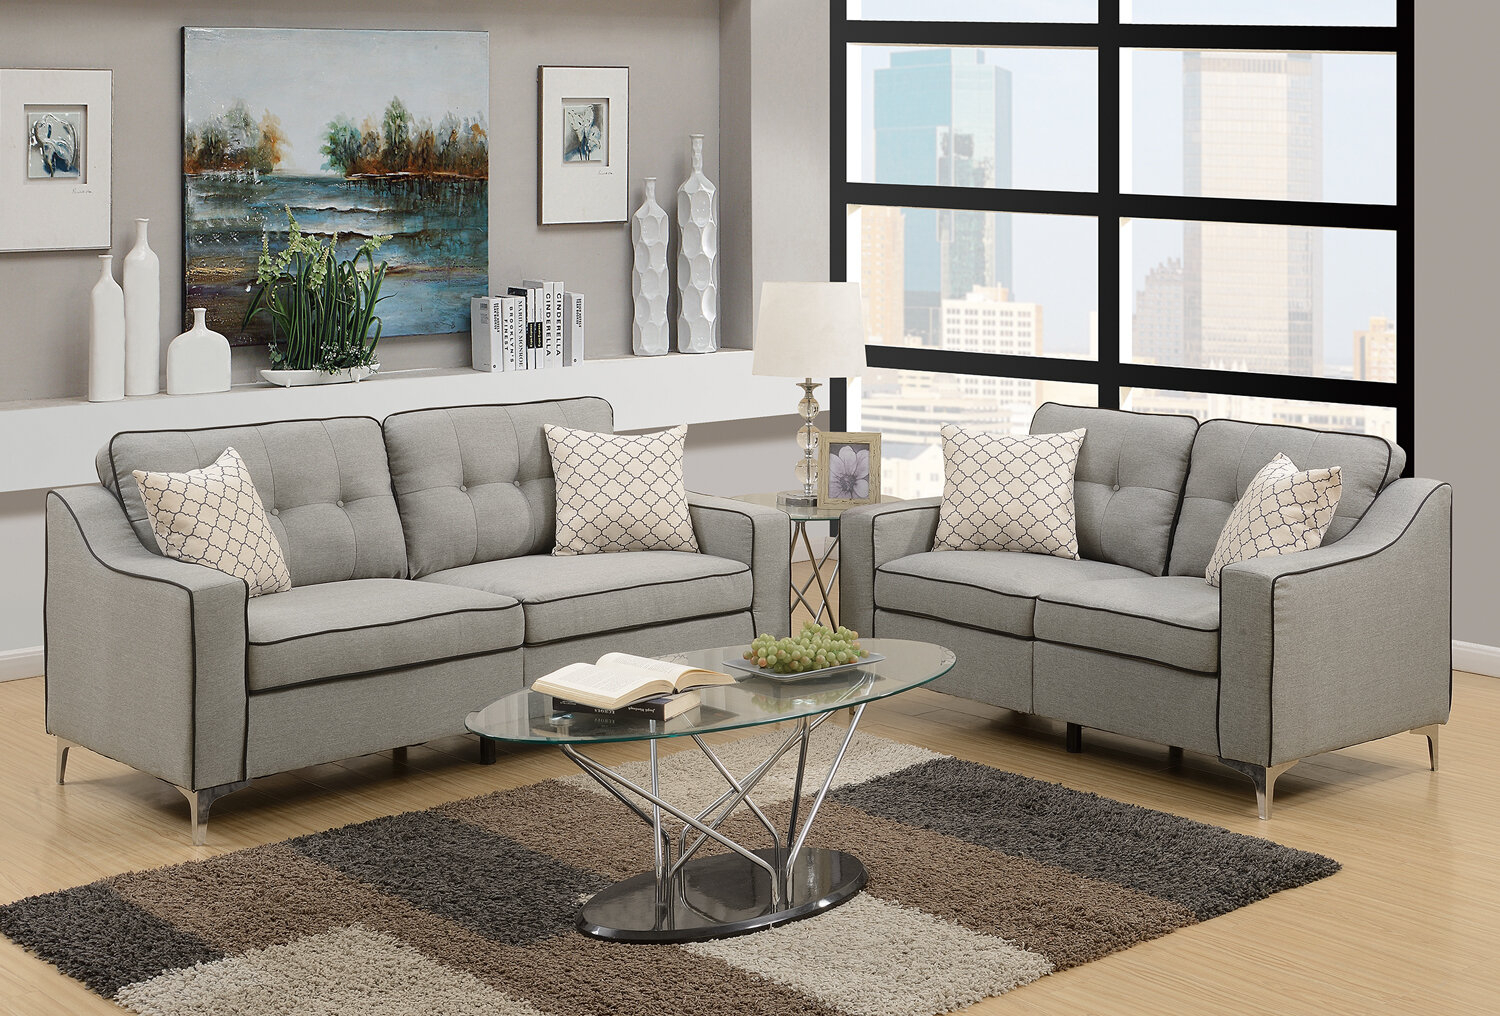 Weston Living Room Collection